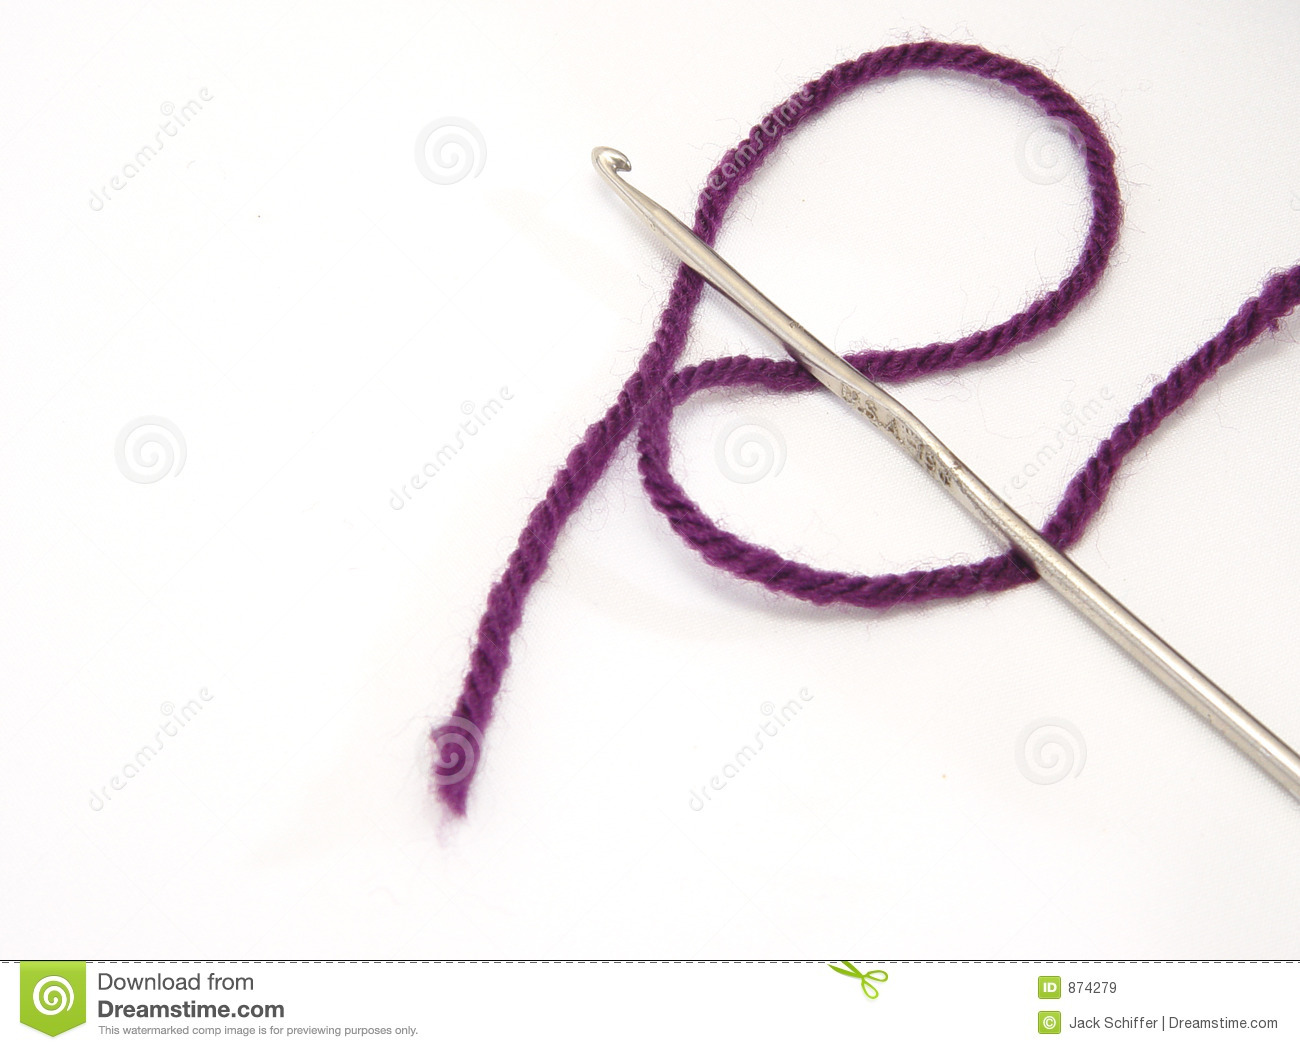 Crochet Hook Royalty Free Stock Images   Image  874279